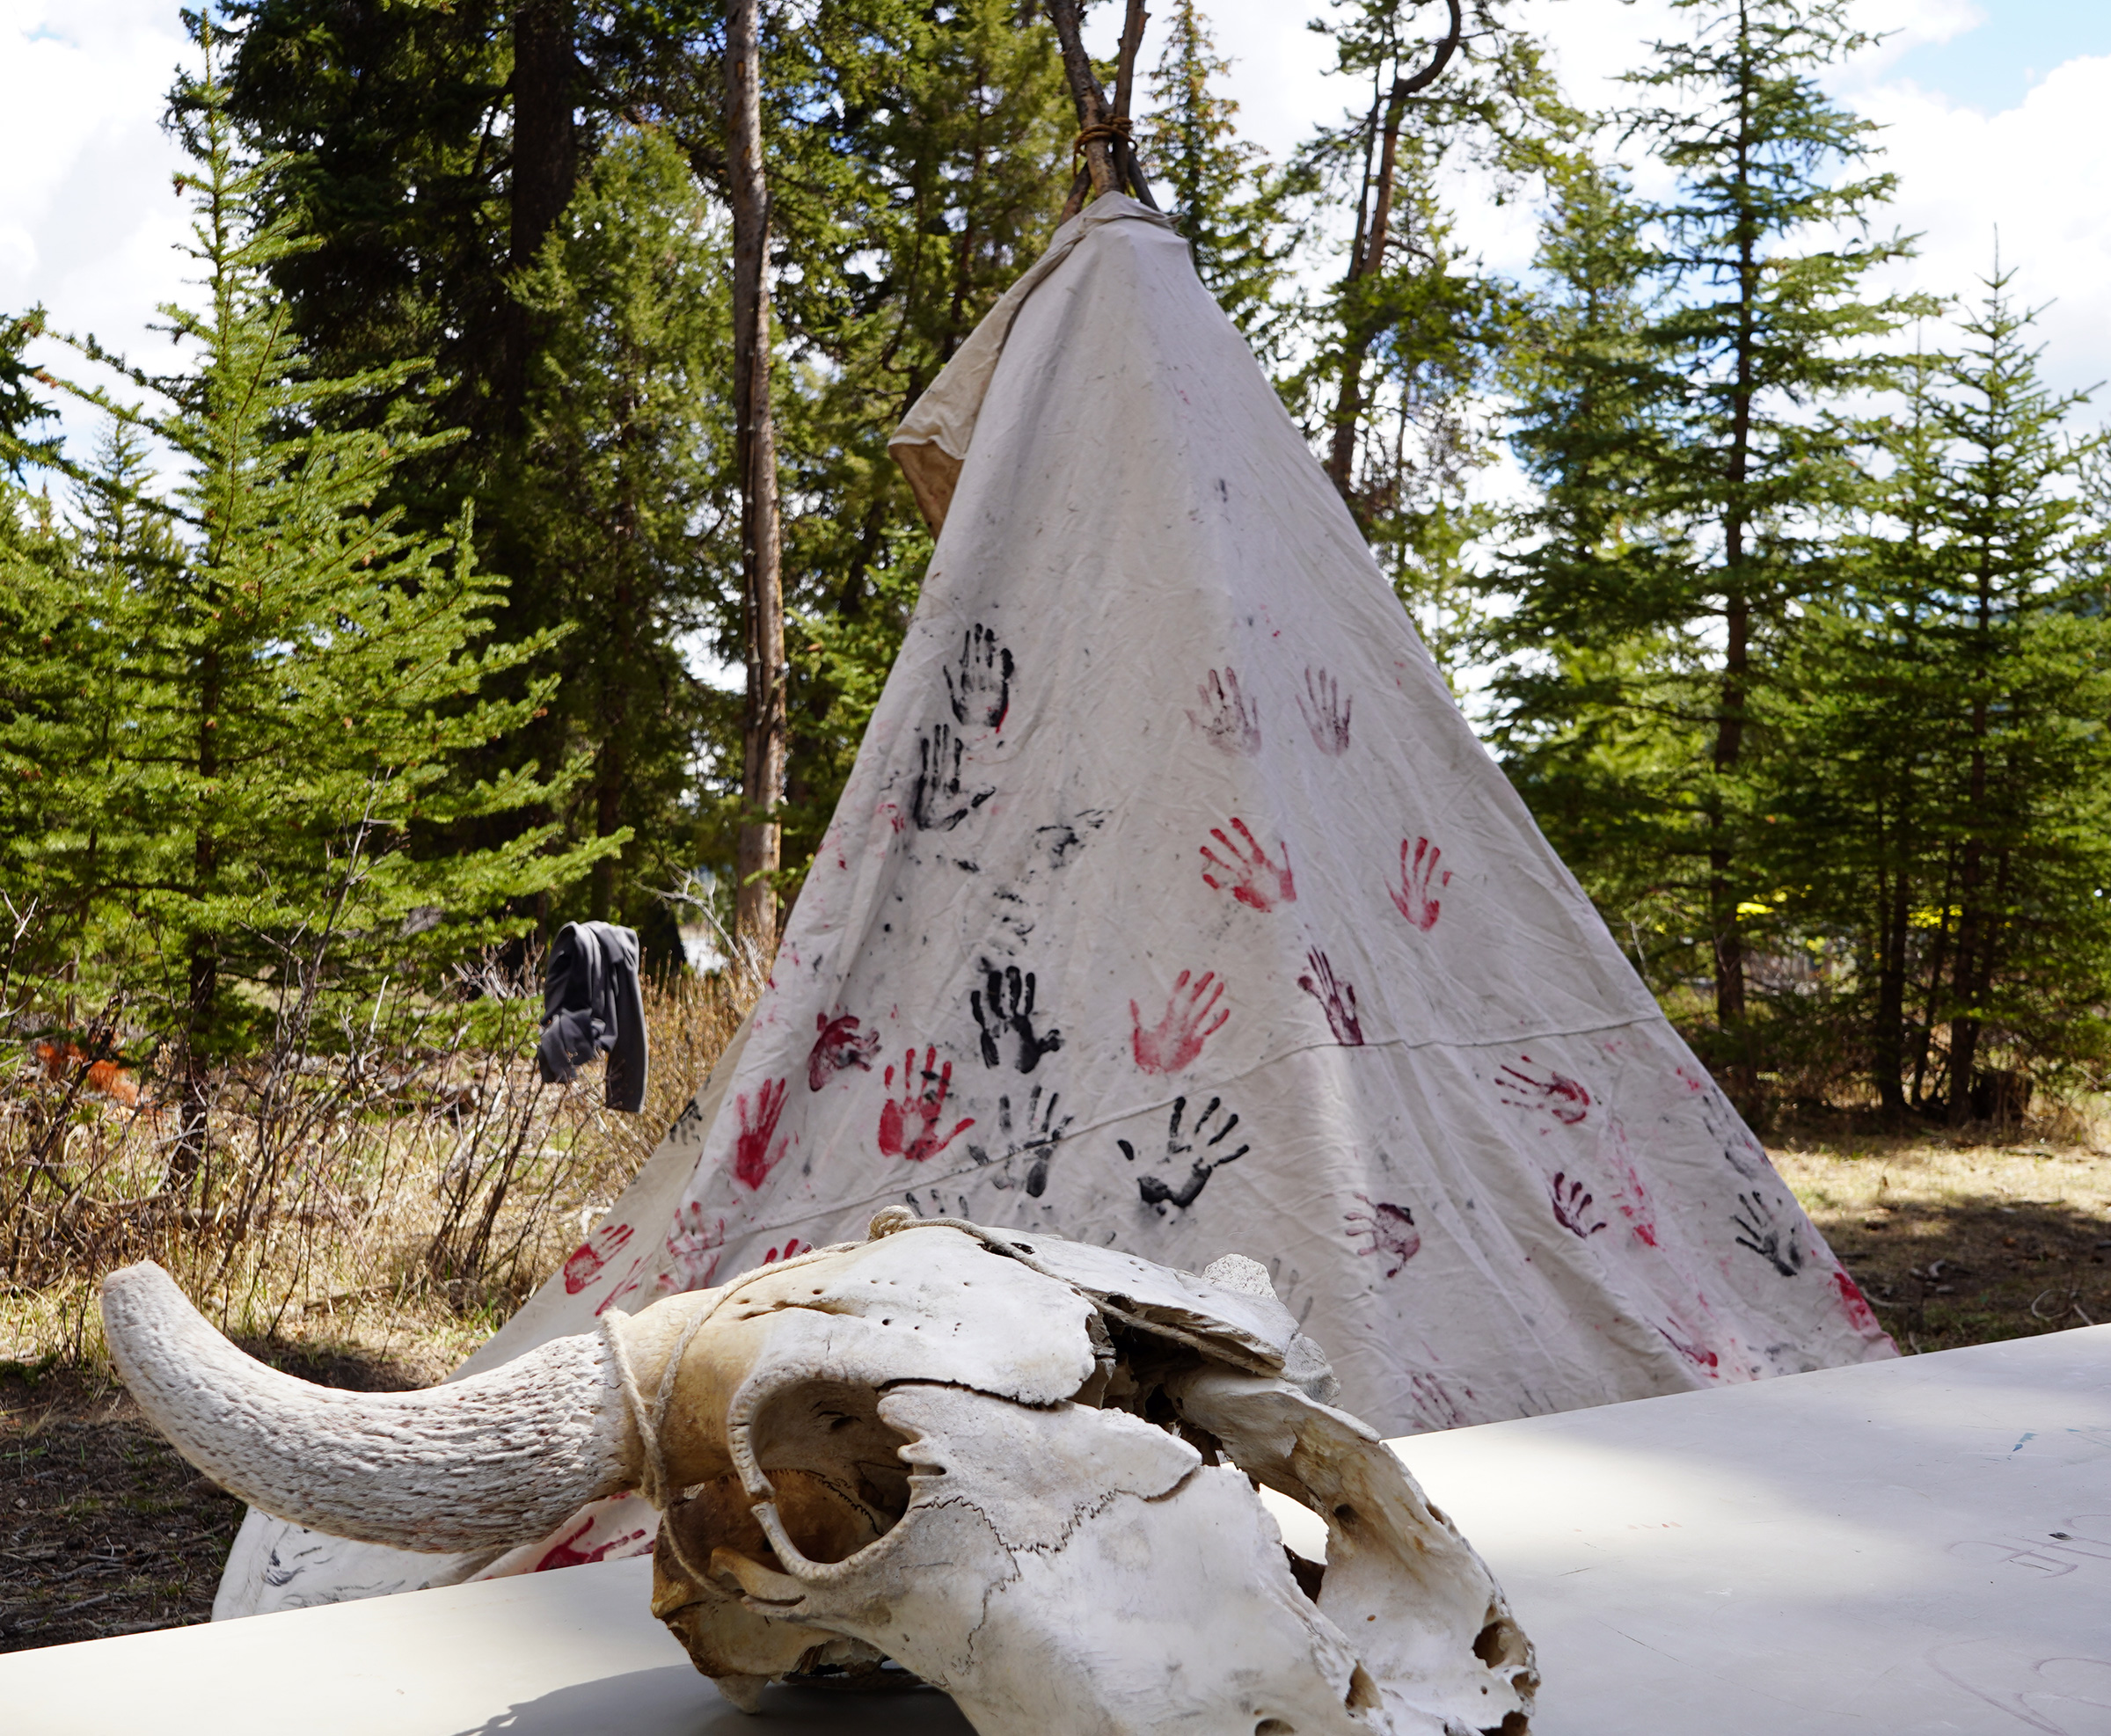 An animal skull with horns lies on a white plastic picnic table in front of a tepee that has painted handprints on it. 